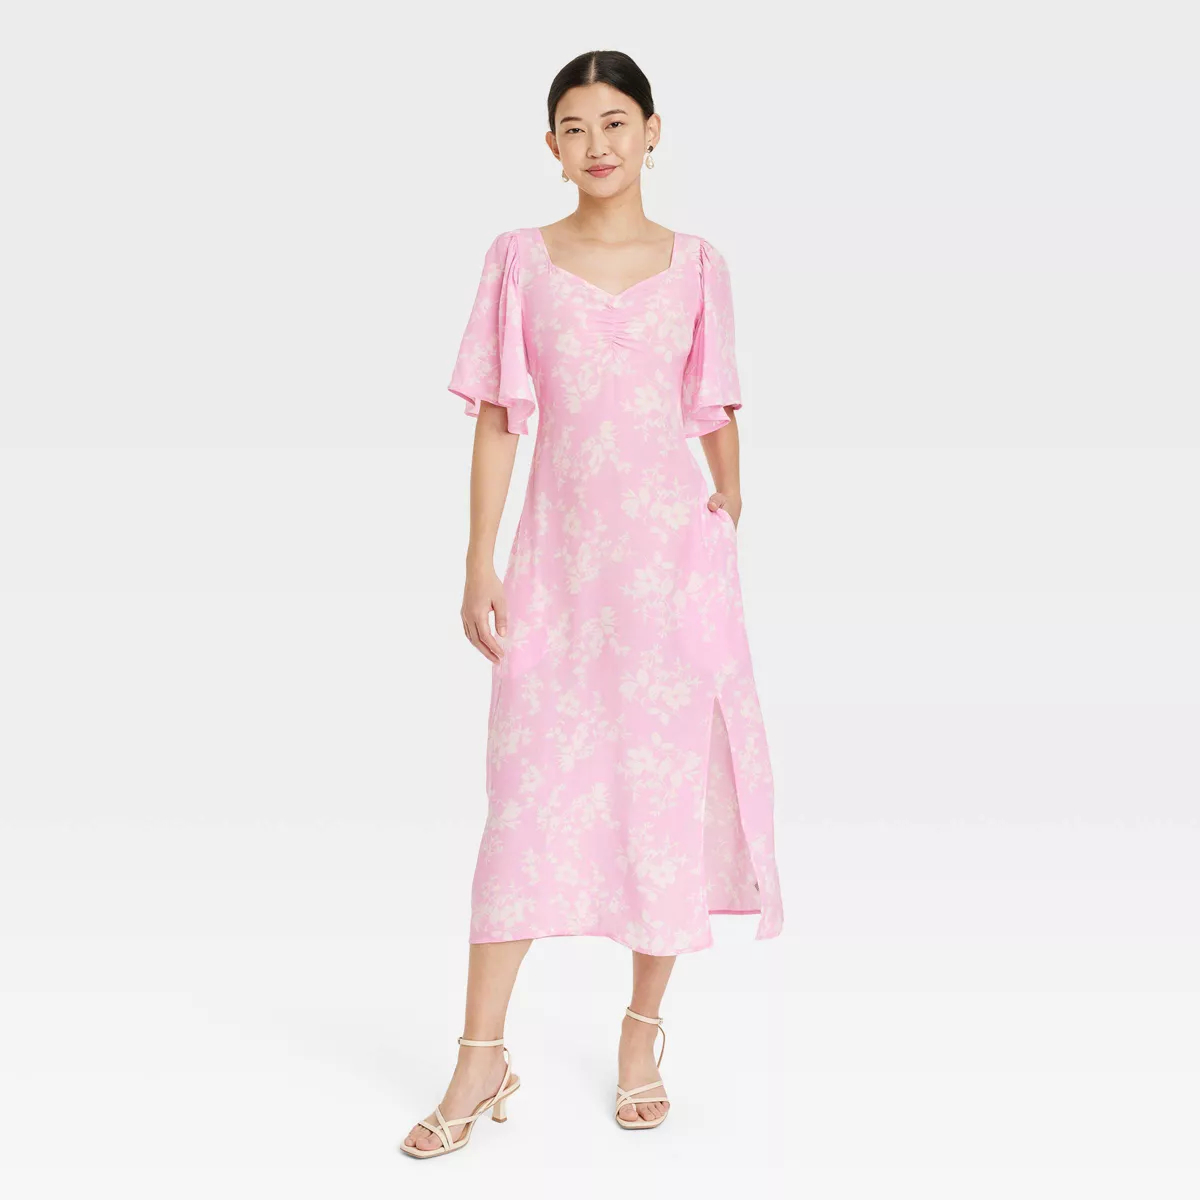 Model wearing a pink floral midi dress with puff sleeves and v-neckline, paired with strappy sandals